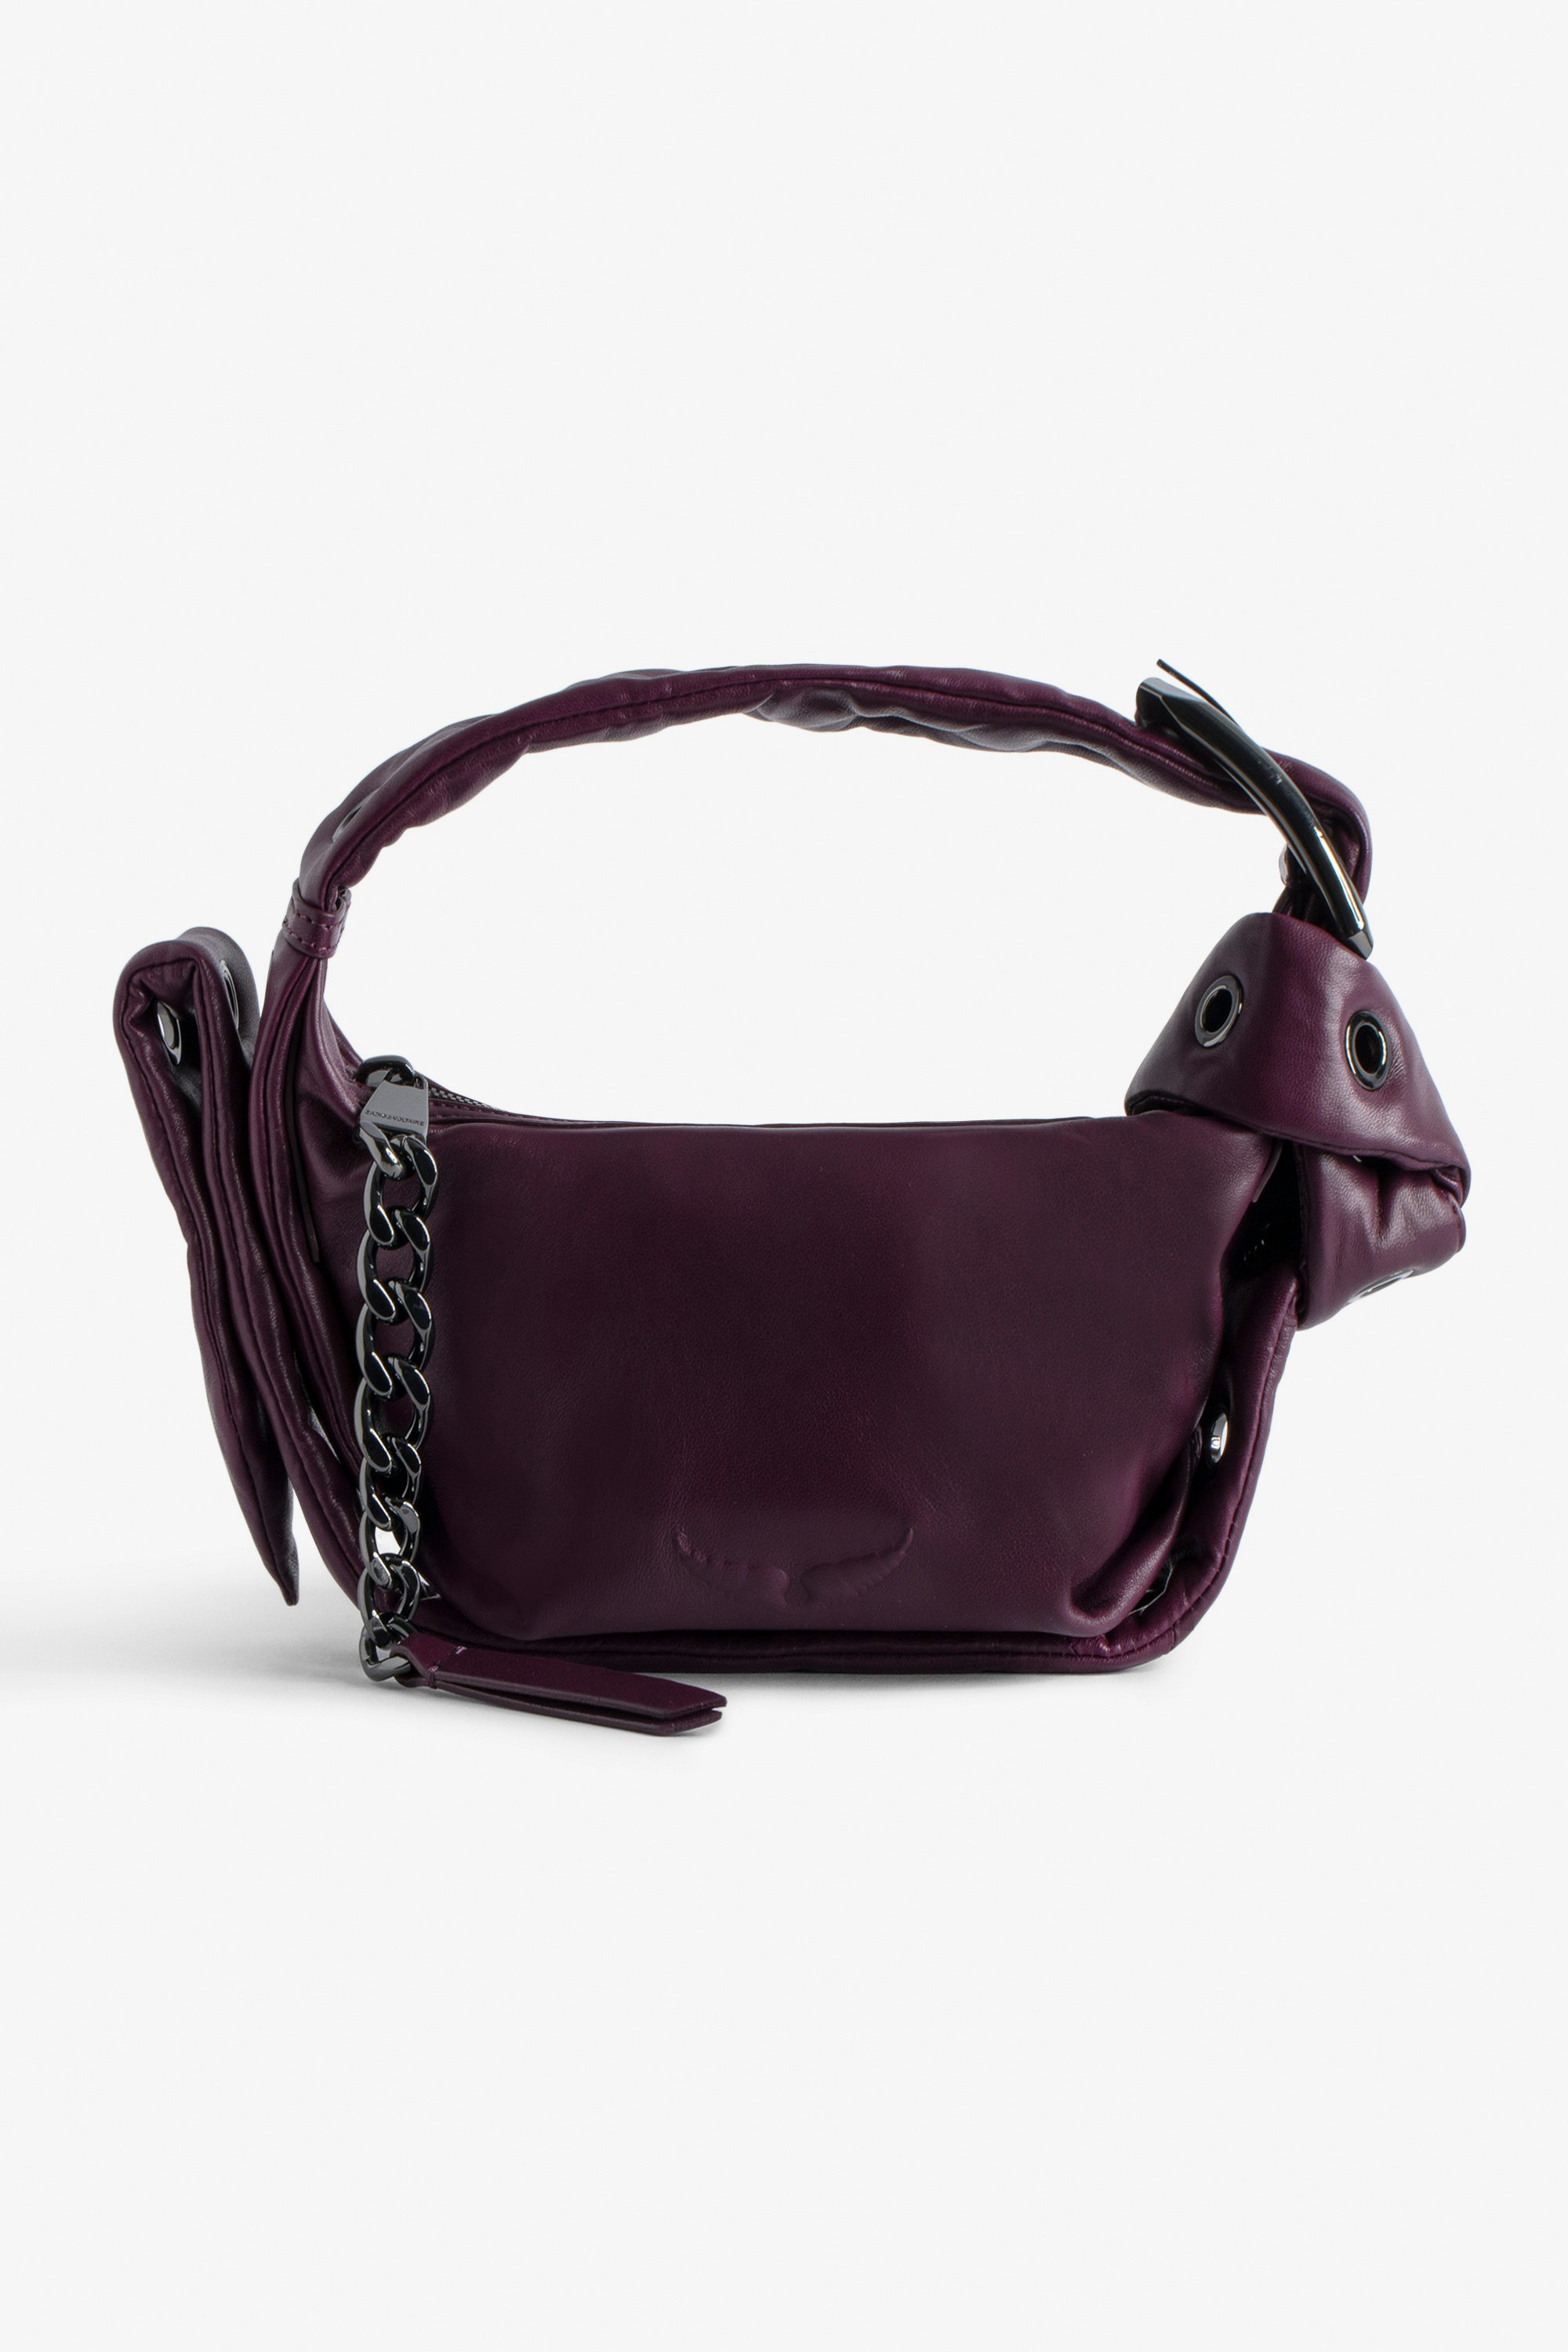 Le Cecilia XS Obsession Bag Women’s small burgundy smooth leather bag with shoulder strap and metal C buckle.